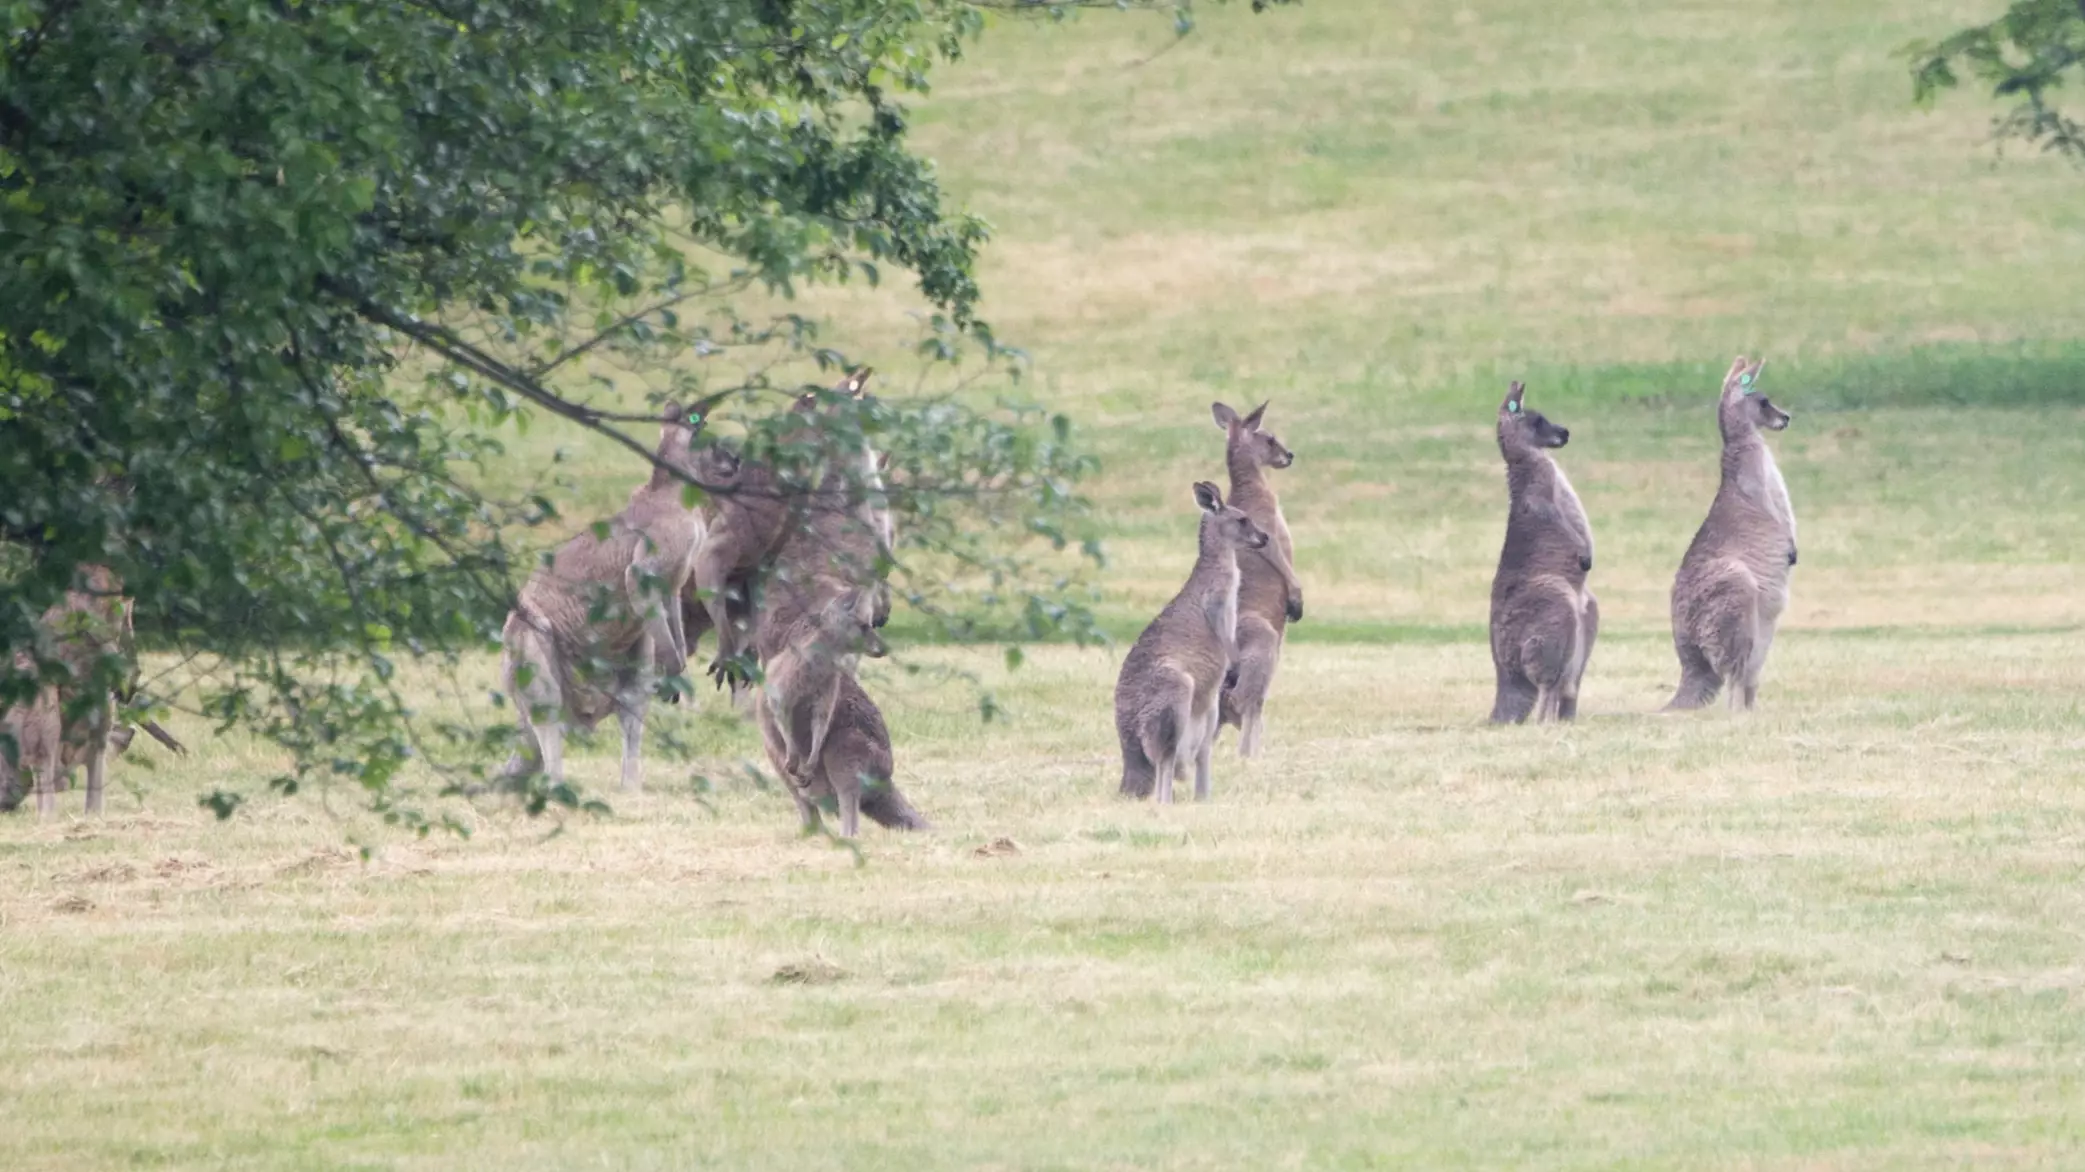 Teenager Charged With Torture Offences After 20 Kangaroos And Joeys Were Savagely Killed 